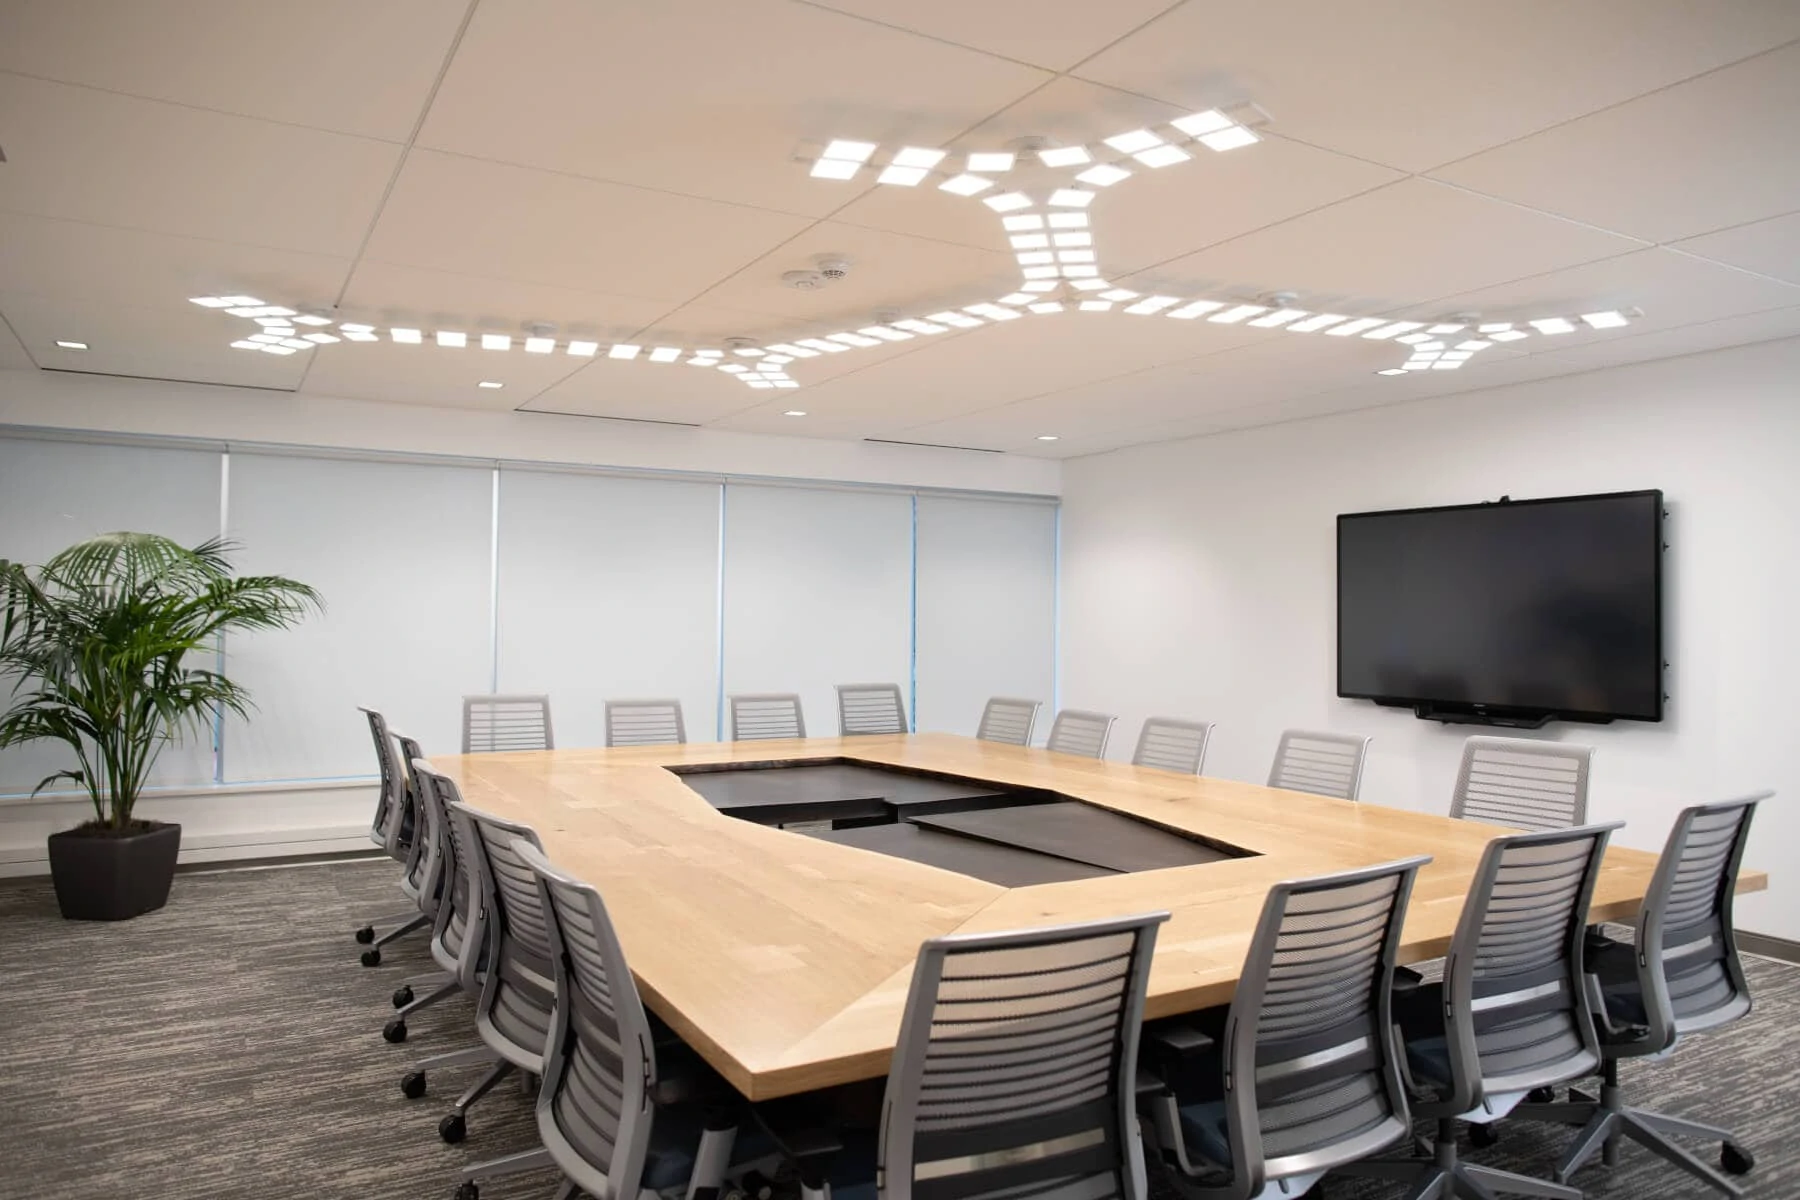 Acuity Brands´ ceiling mounted OLED luminaire Trilia in QCI conference room